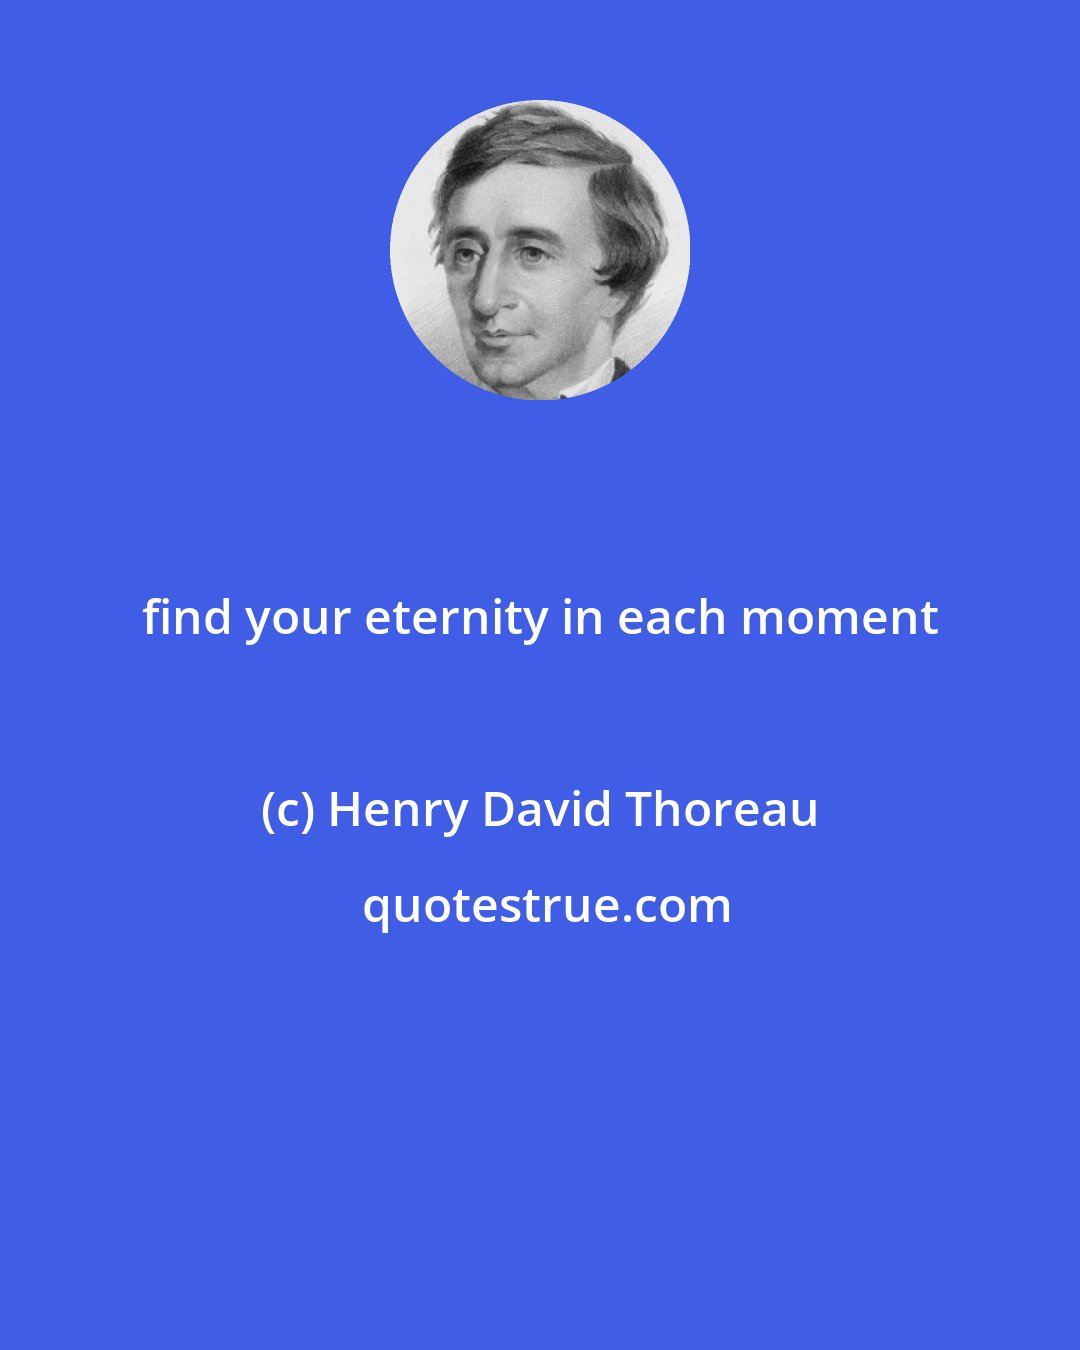 Henry David Thoreau: find your eternity in each moment